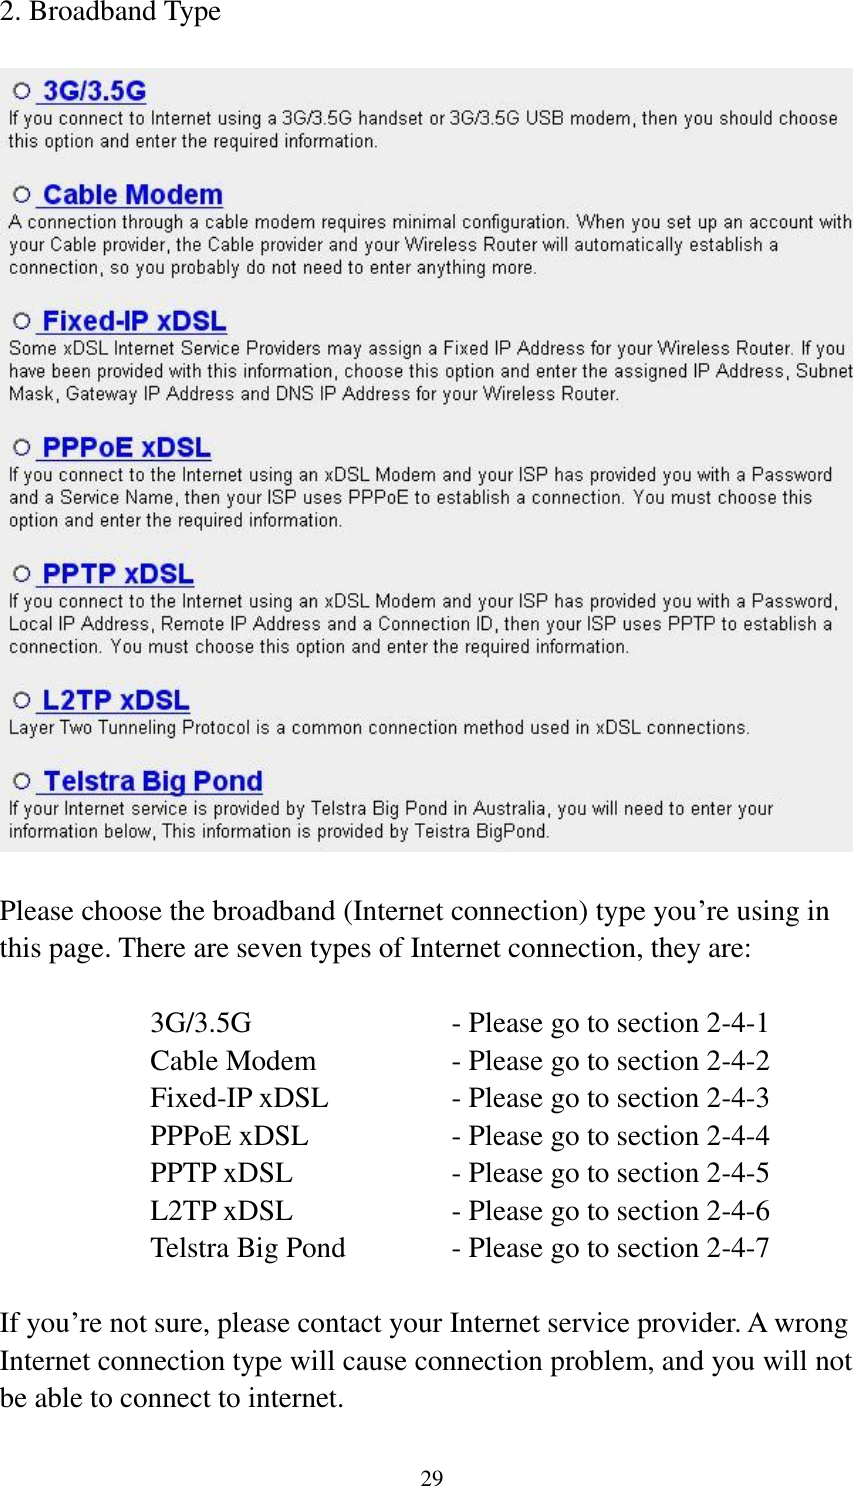 29 2. Broadband Type    Please choose the broadband (Internet connection) type you‟re using in this page. There are seven types of Internet connection, they are:  3G/3.5G              - Please go to section 2-4-1 Cable Modem      - Please go to section 2-4-2 Fixed-IP xDSL      - Please go to section 2-4-3 PPPoE xDSL      - Please go to section 2-4-4 PPTP xDSL       - Please go to section 2-4-5 L2TP xDSL       - Please go to section 2-4-6 Telstra Big Pond     - Please go to section 2-4-7  If you‟re not sure, please contact your Internet service provider. A wrong Internet connection type will cause connection problem, and you will not be able to connect to internet. 